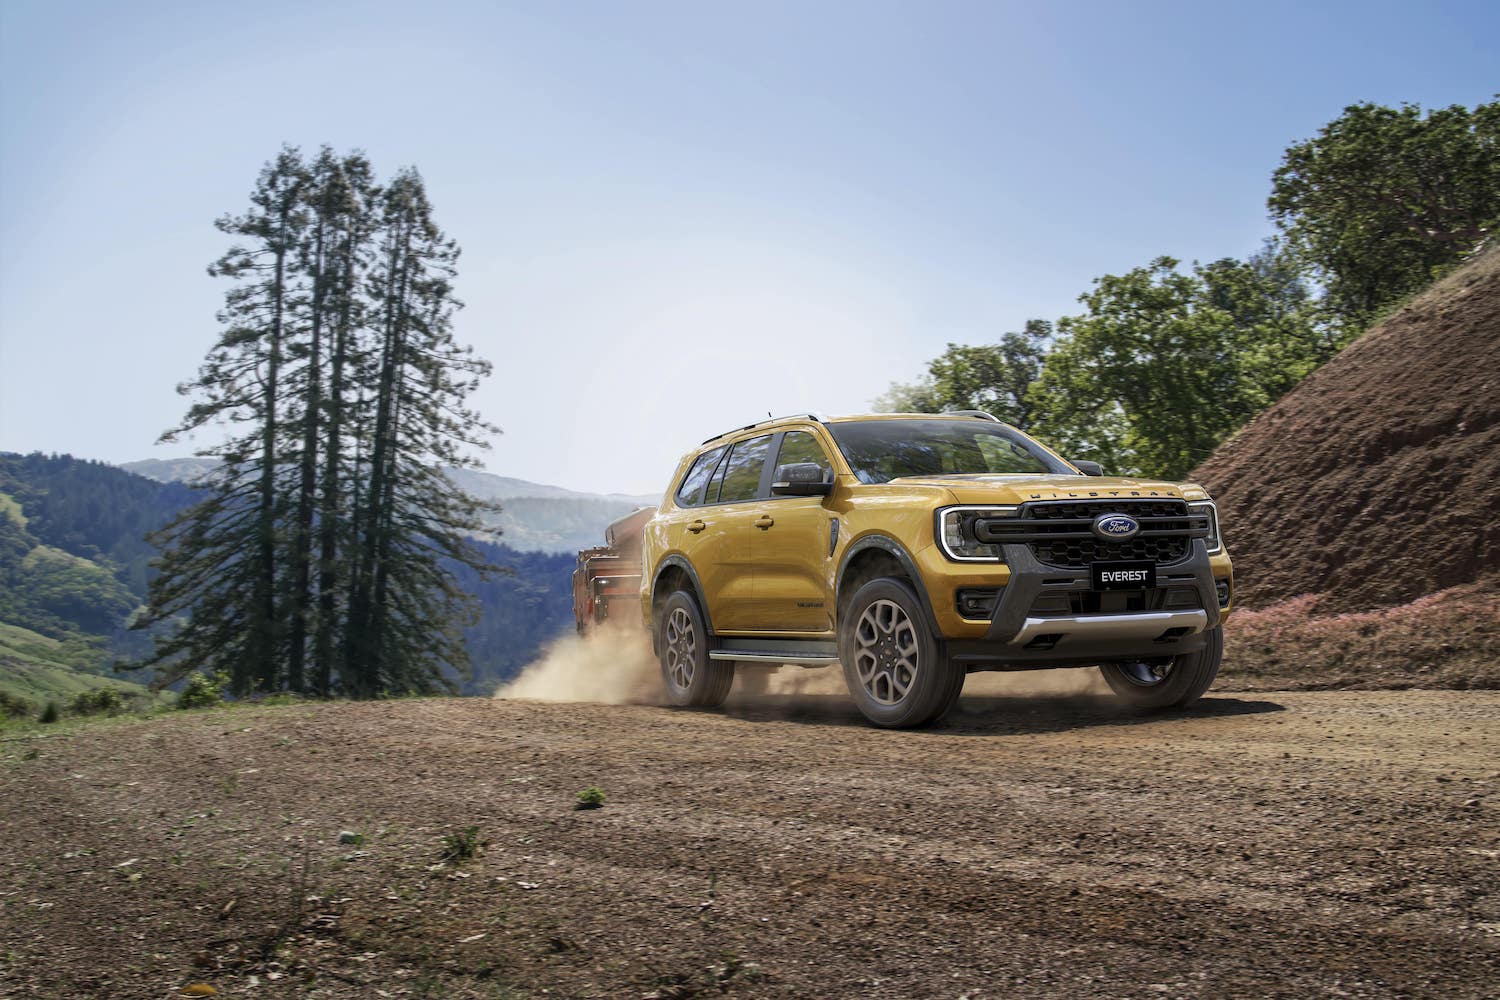 2023 Ford Ranger stands pat with modest price increase